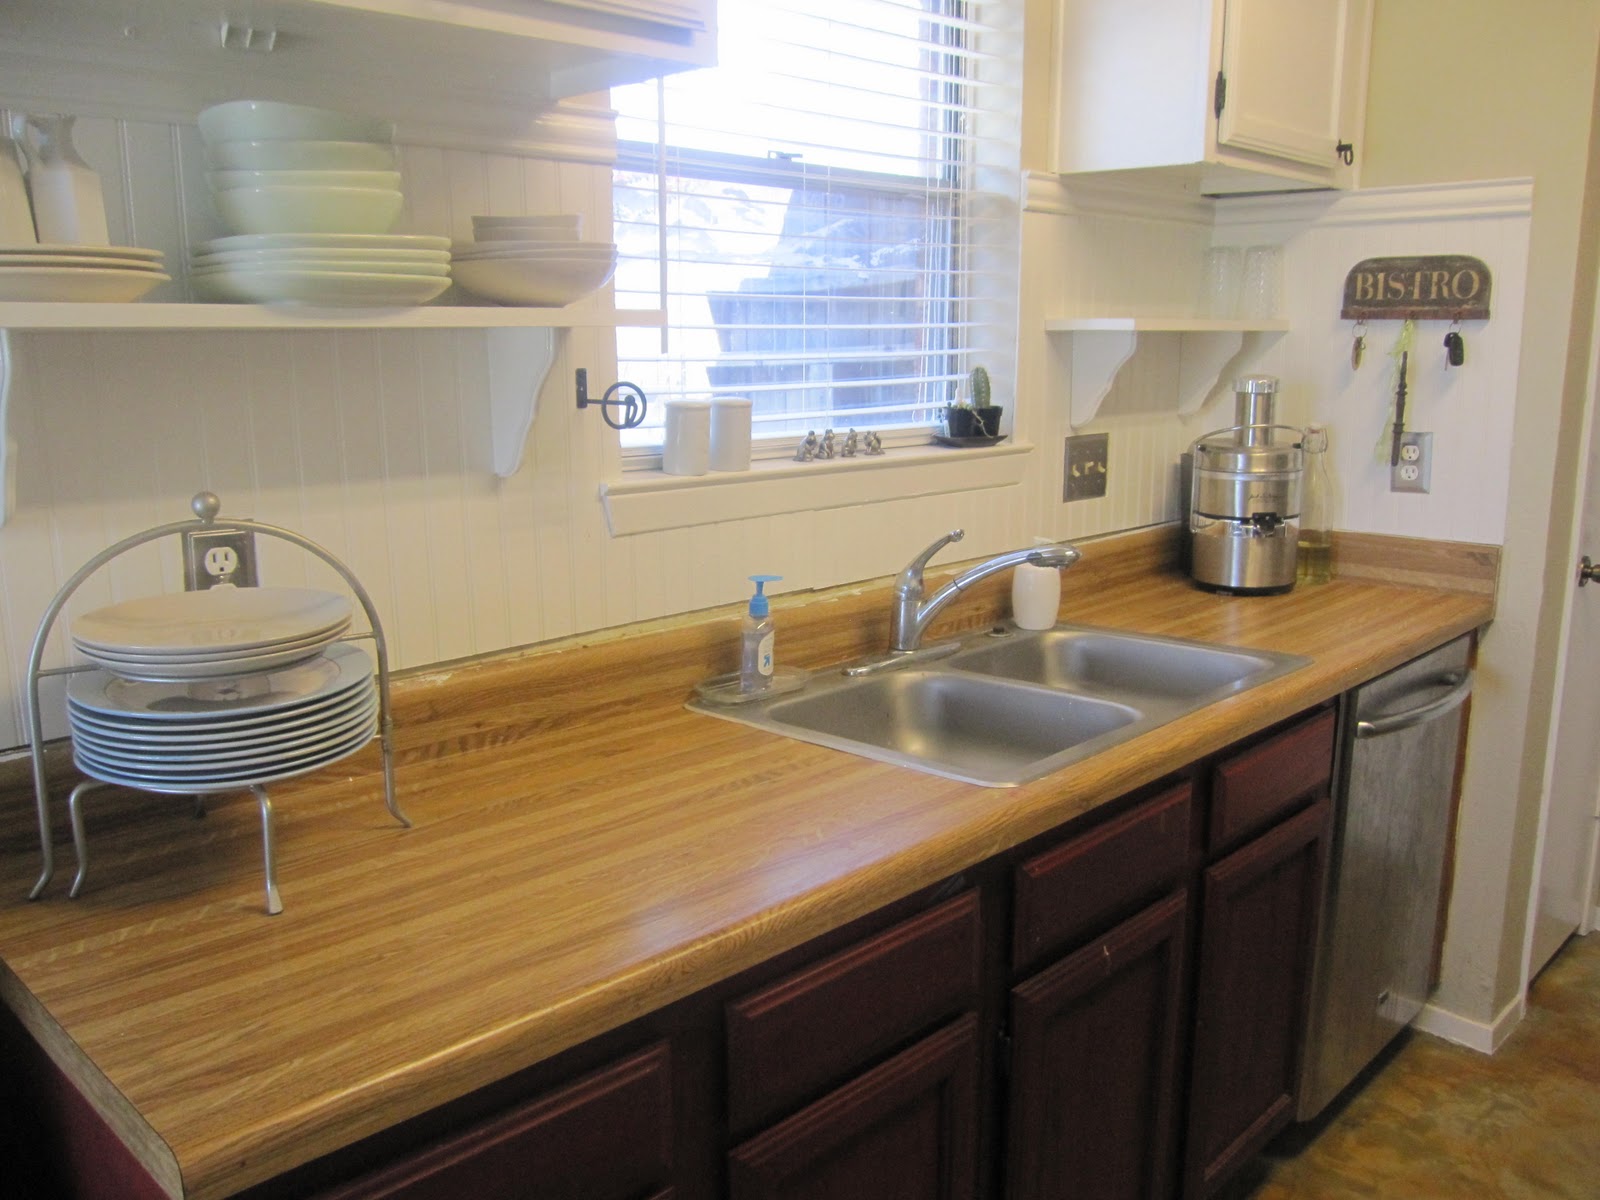 (Before) How to Make Faux Butcher Block Countertops, DIY Faux Butcher Block Countertops